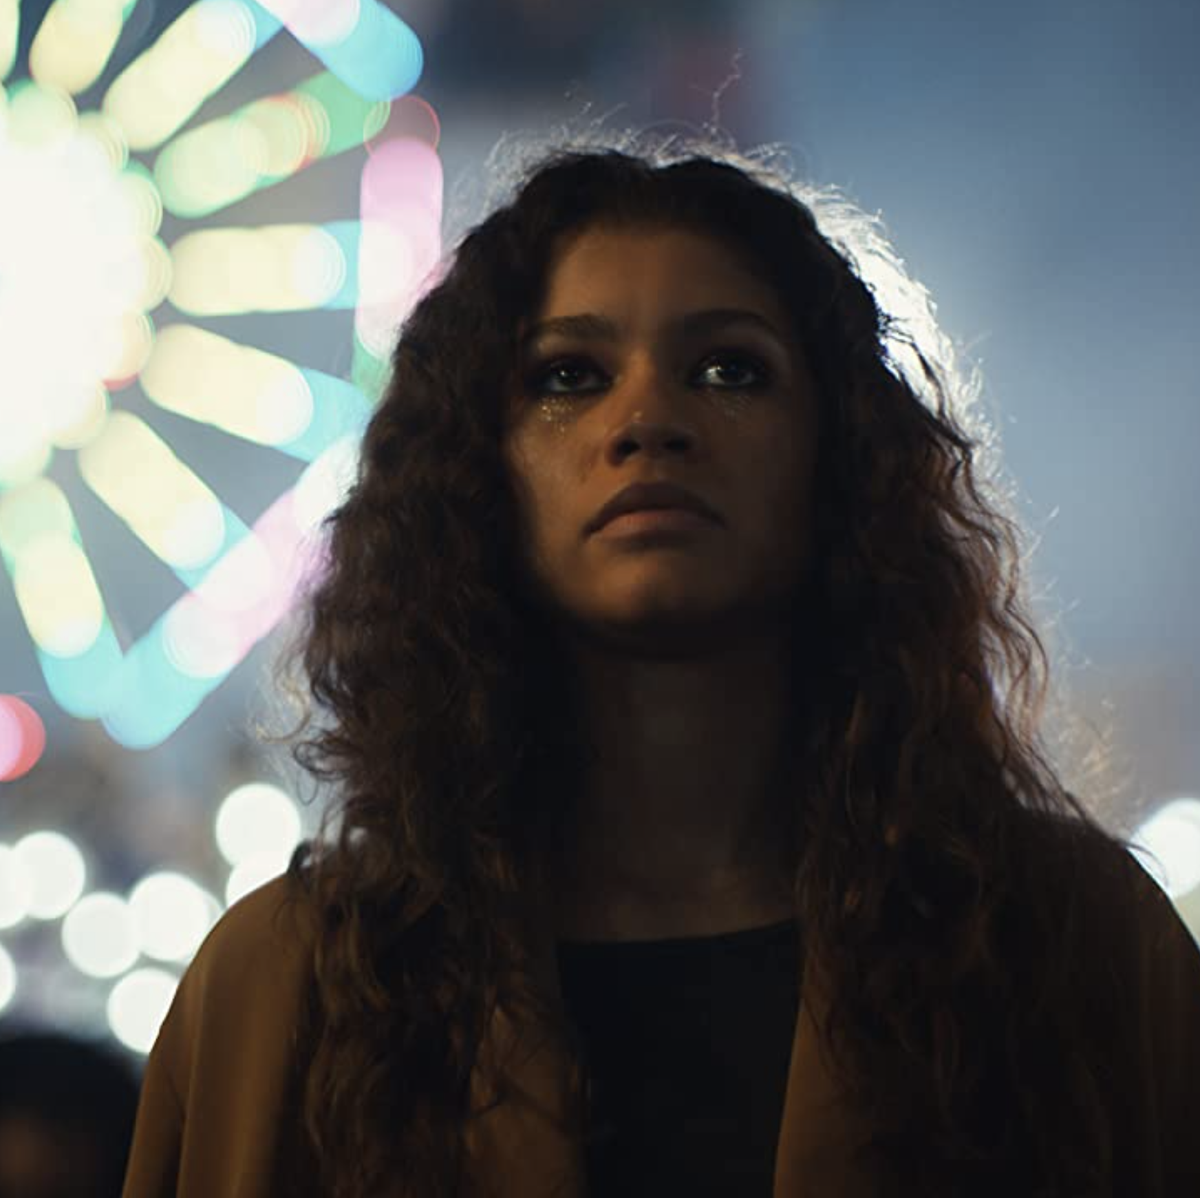 The Idol Episode 1 Features Euphoria Star Alexa Demie, and Sam Levinson  Says the HBO Shows Are in the Same Universe